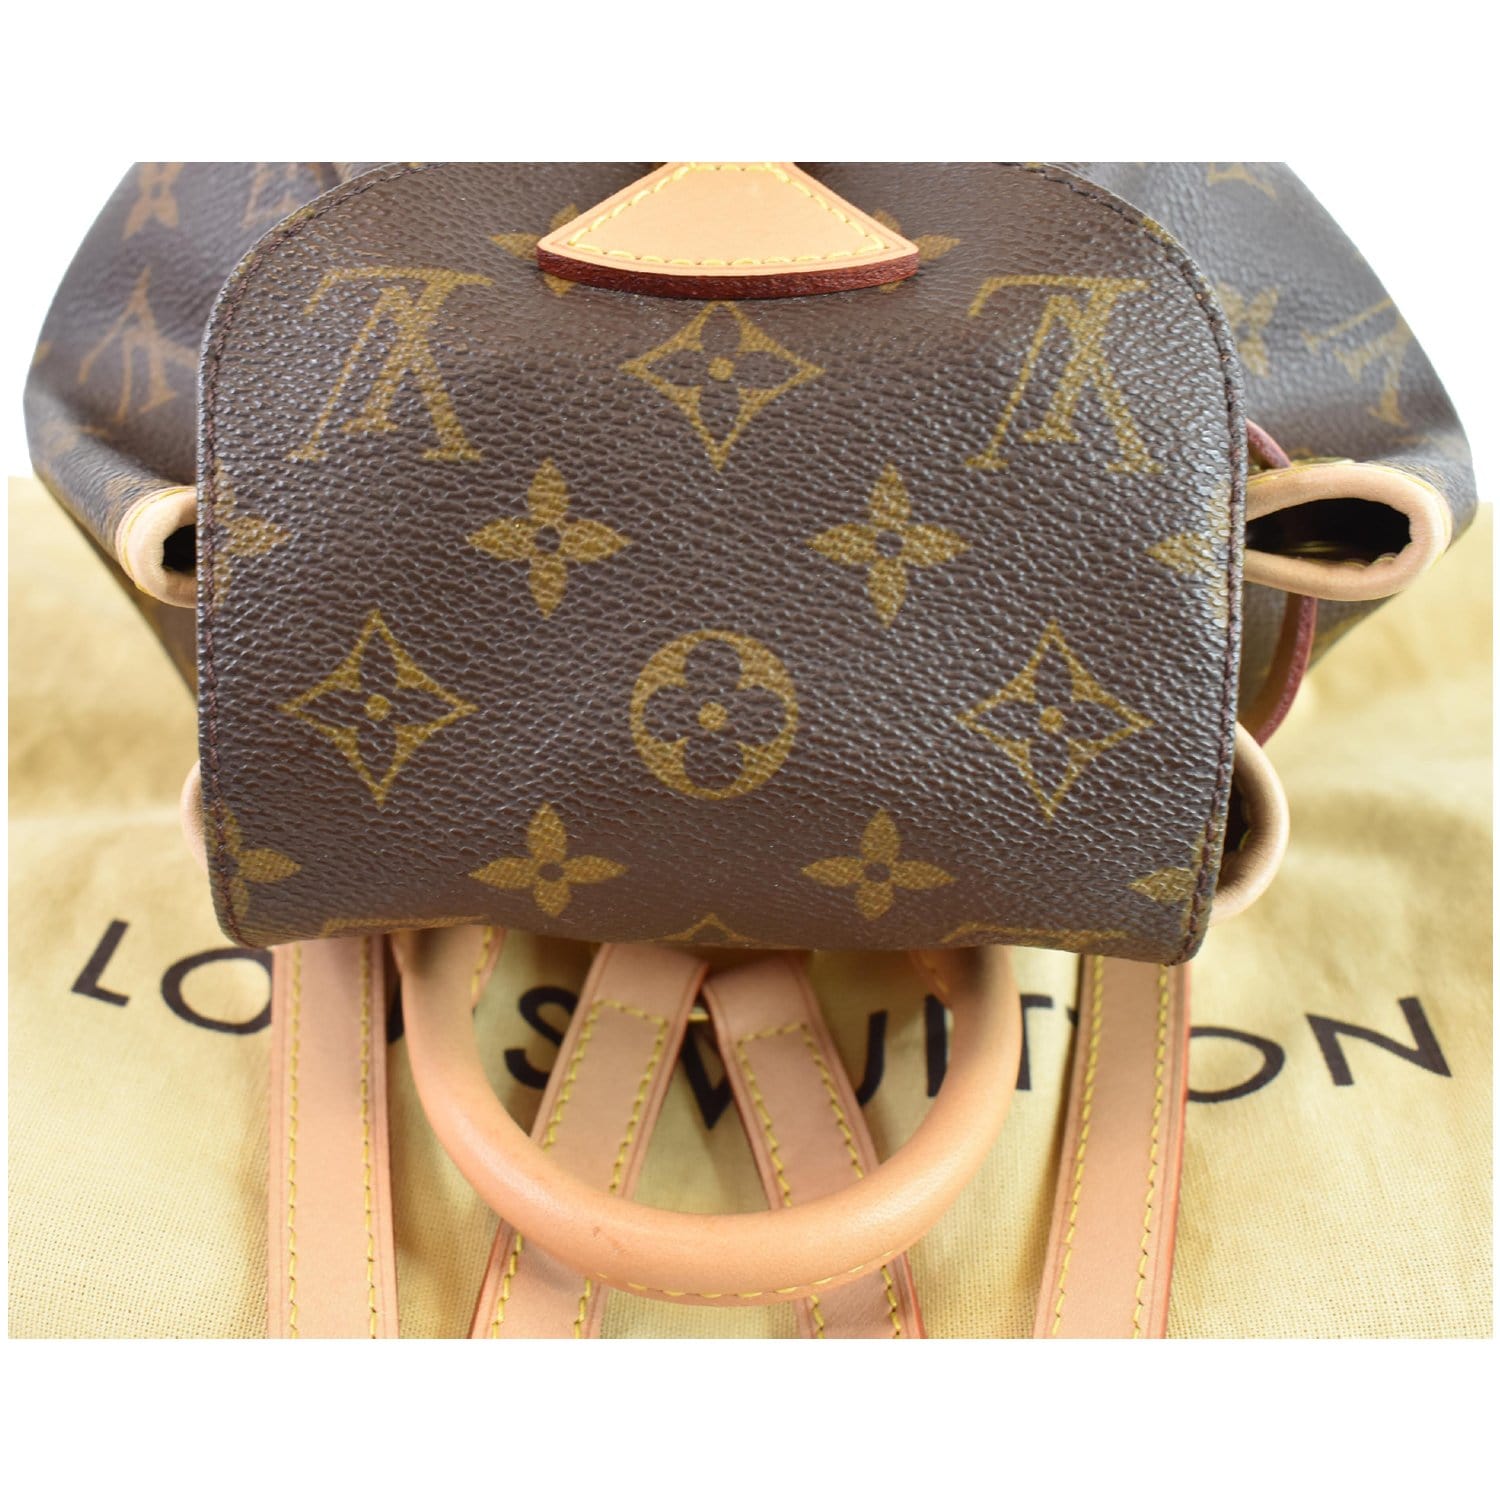 Louis Vuitton Backpack Montsouris Monogram Mini Brown in Coated